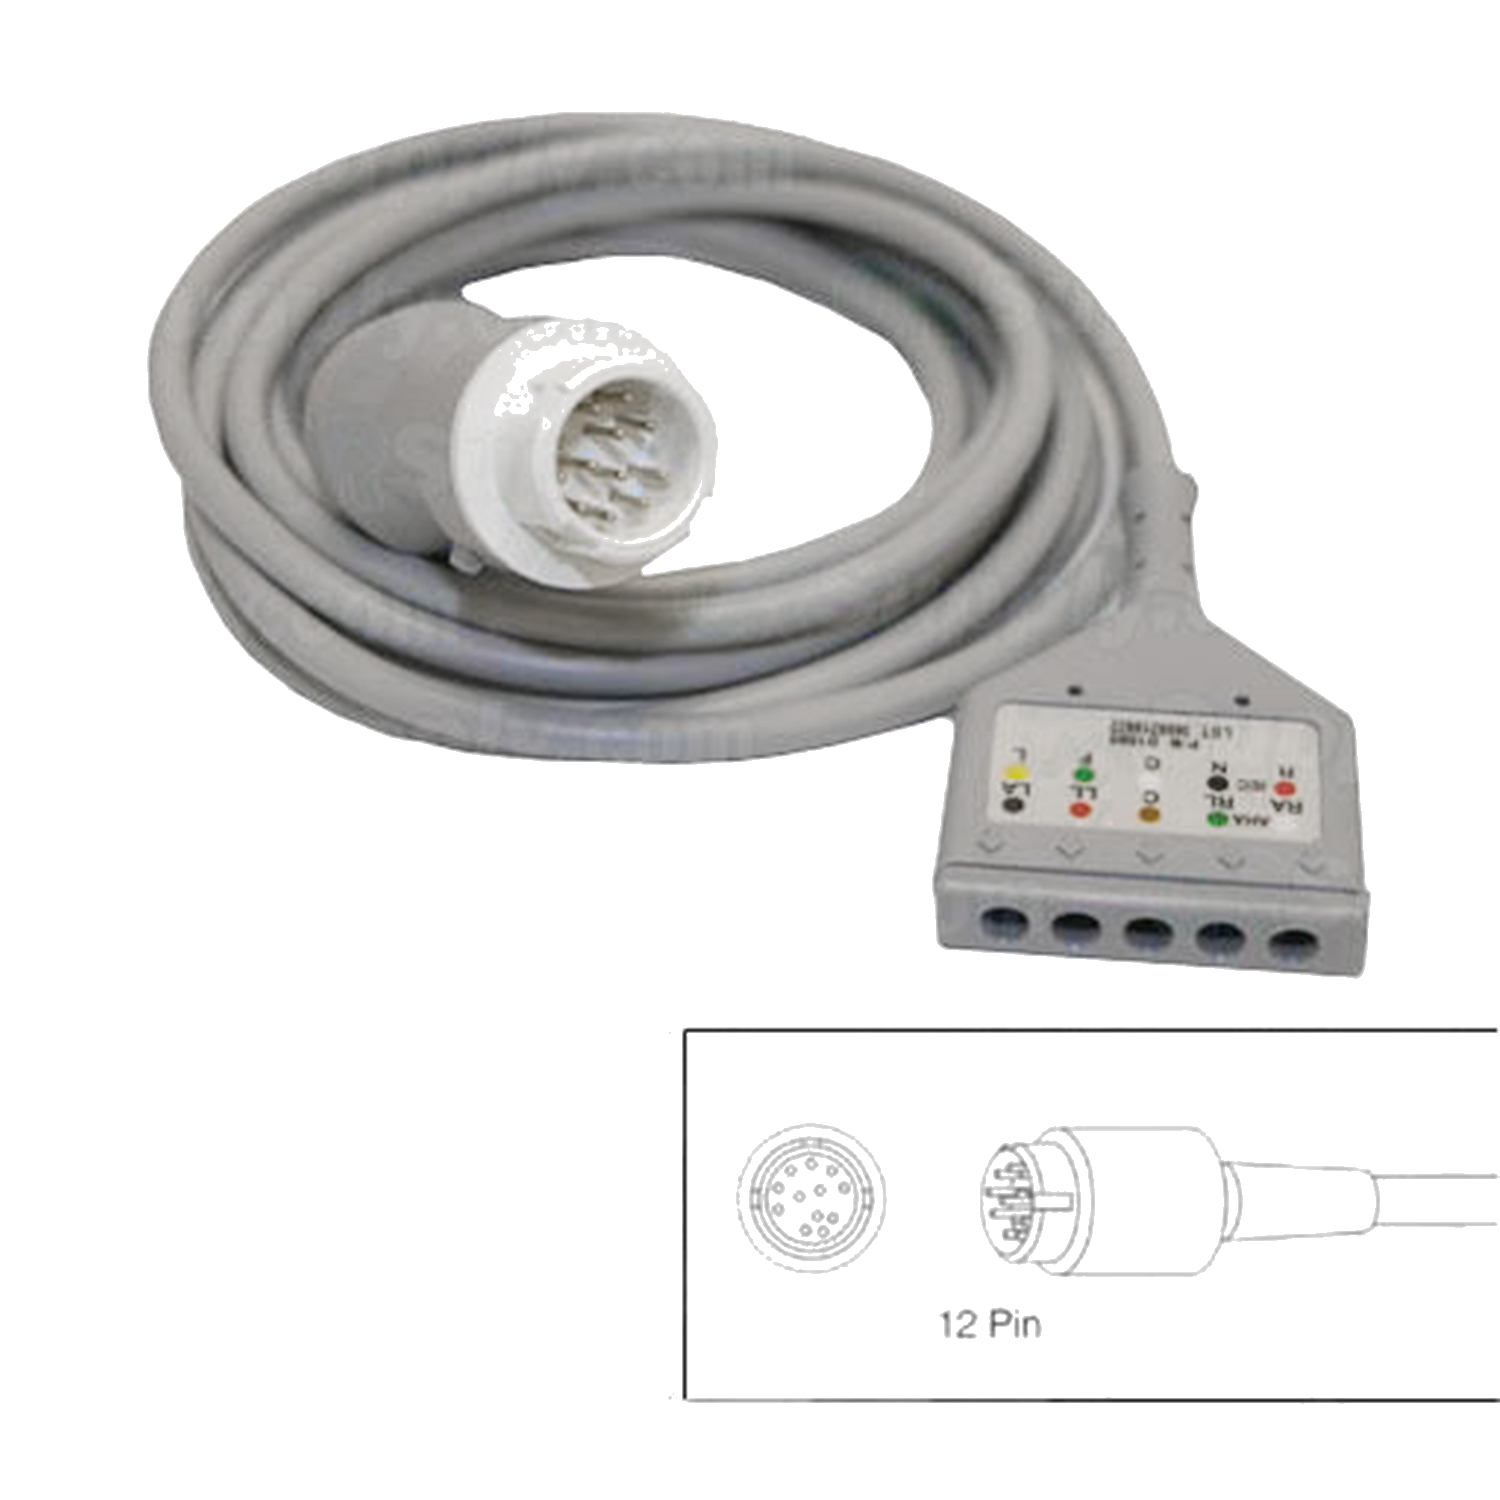 5-Lead Patient Cable for Hewlett Packard Codemasters and Merlin Monitors w/12 Pin Connectors